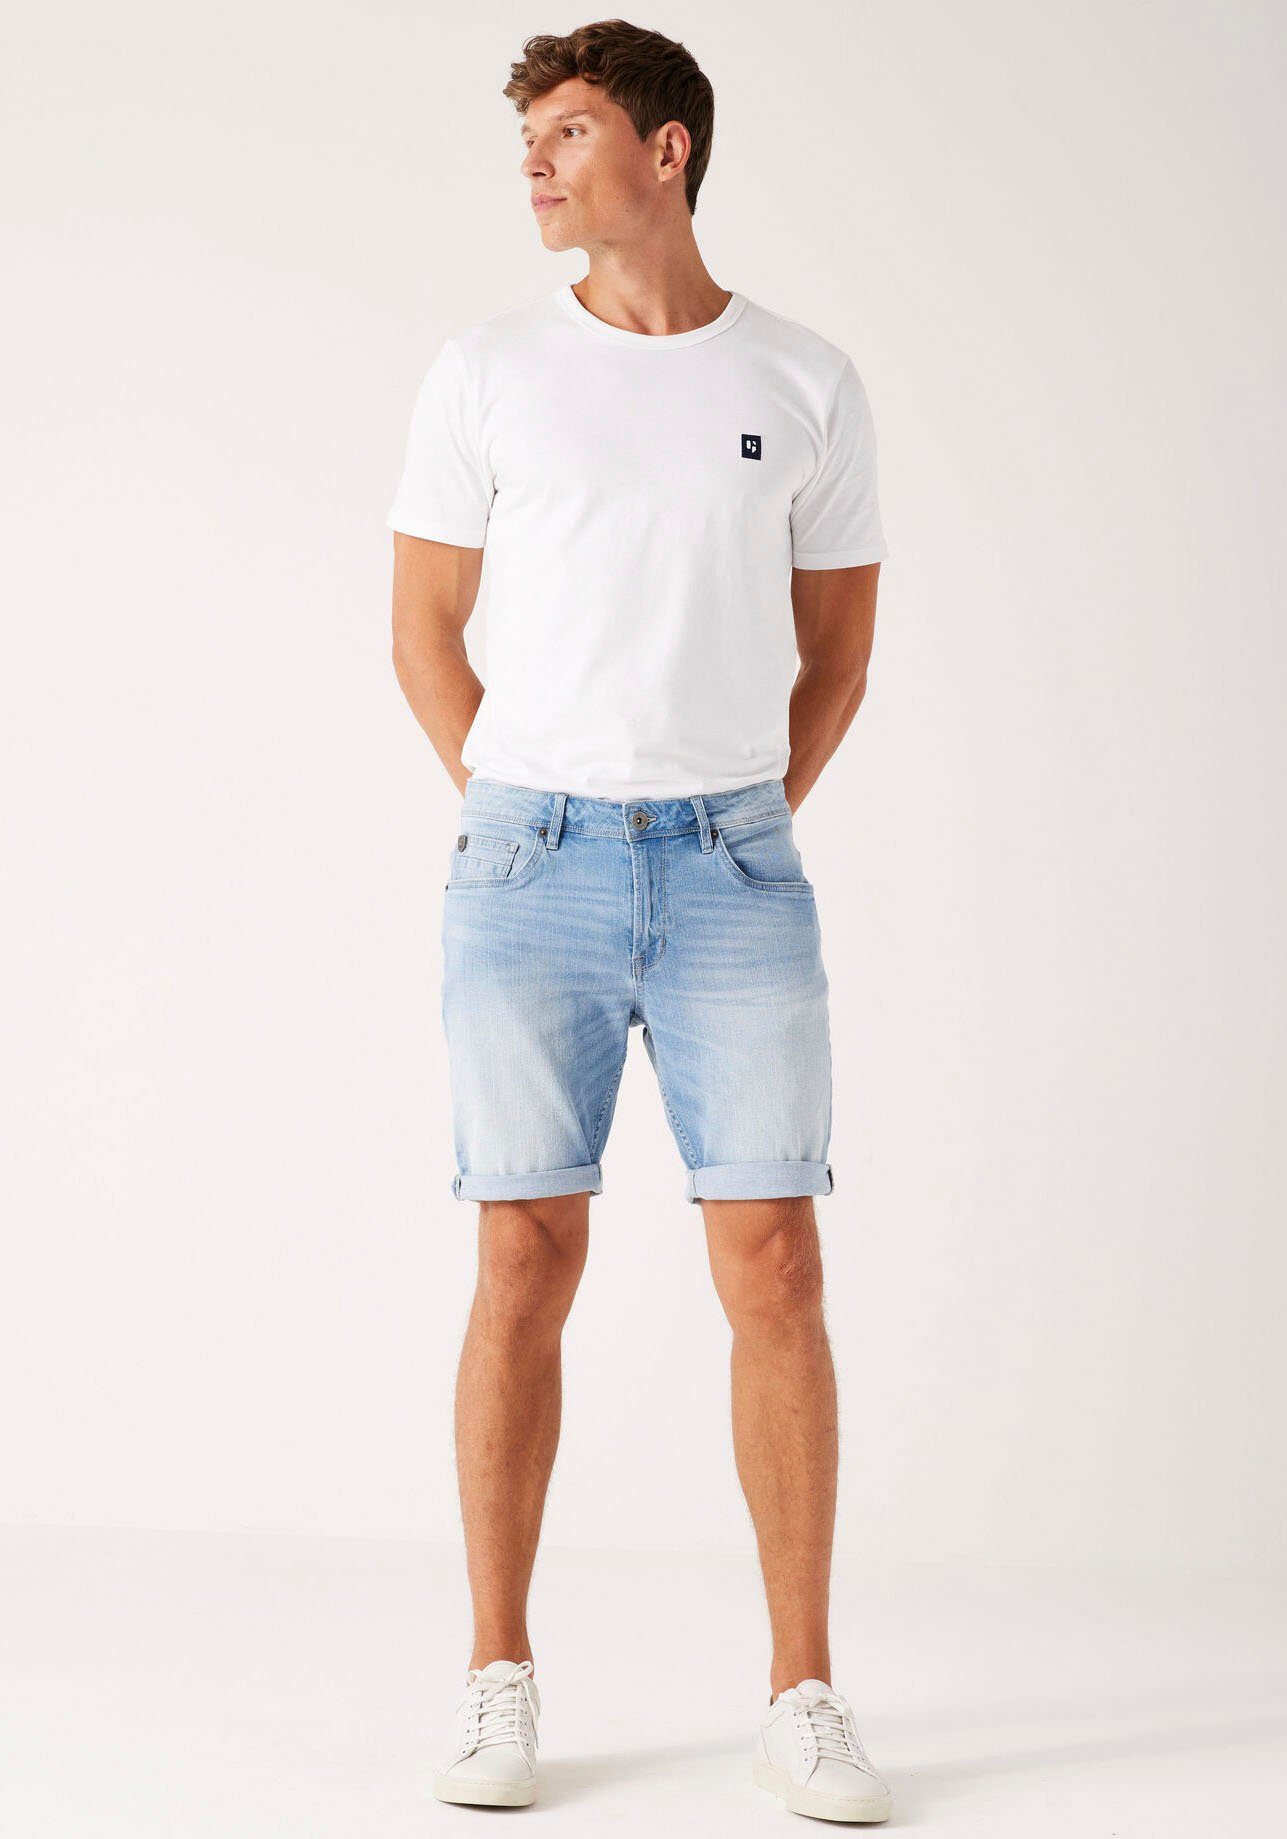 Russo Garcia Jeansshorts light used